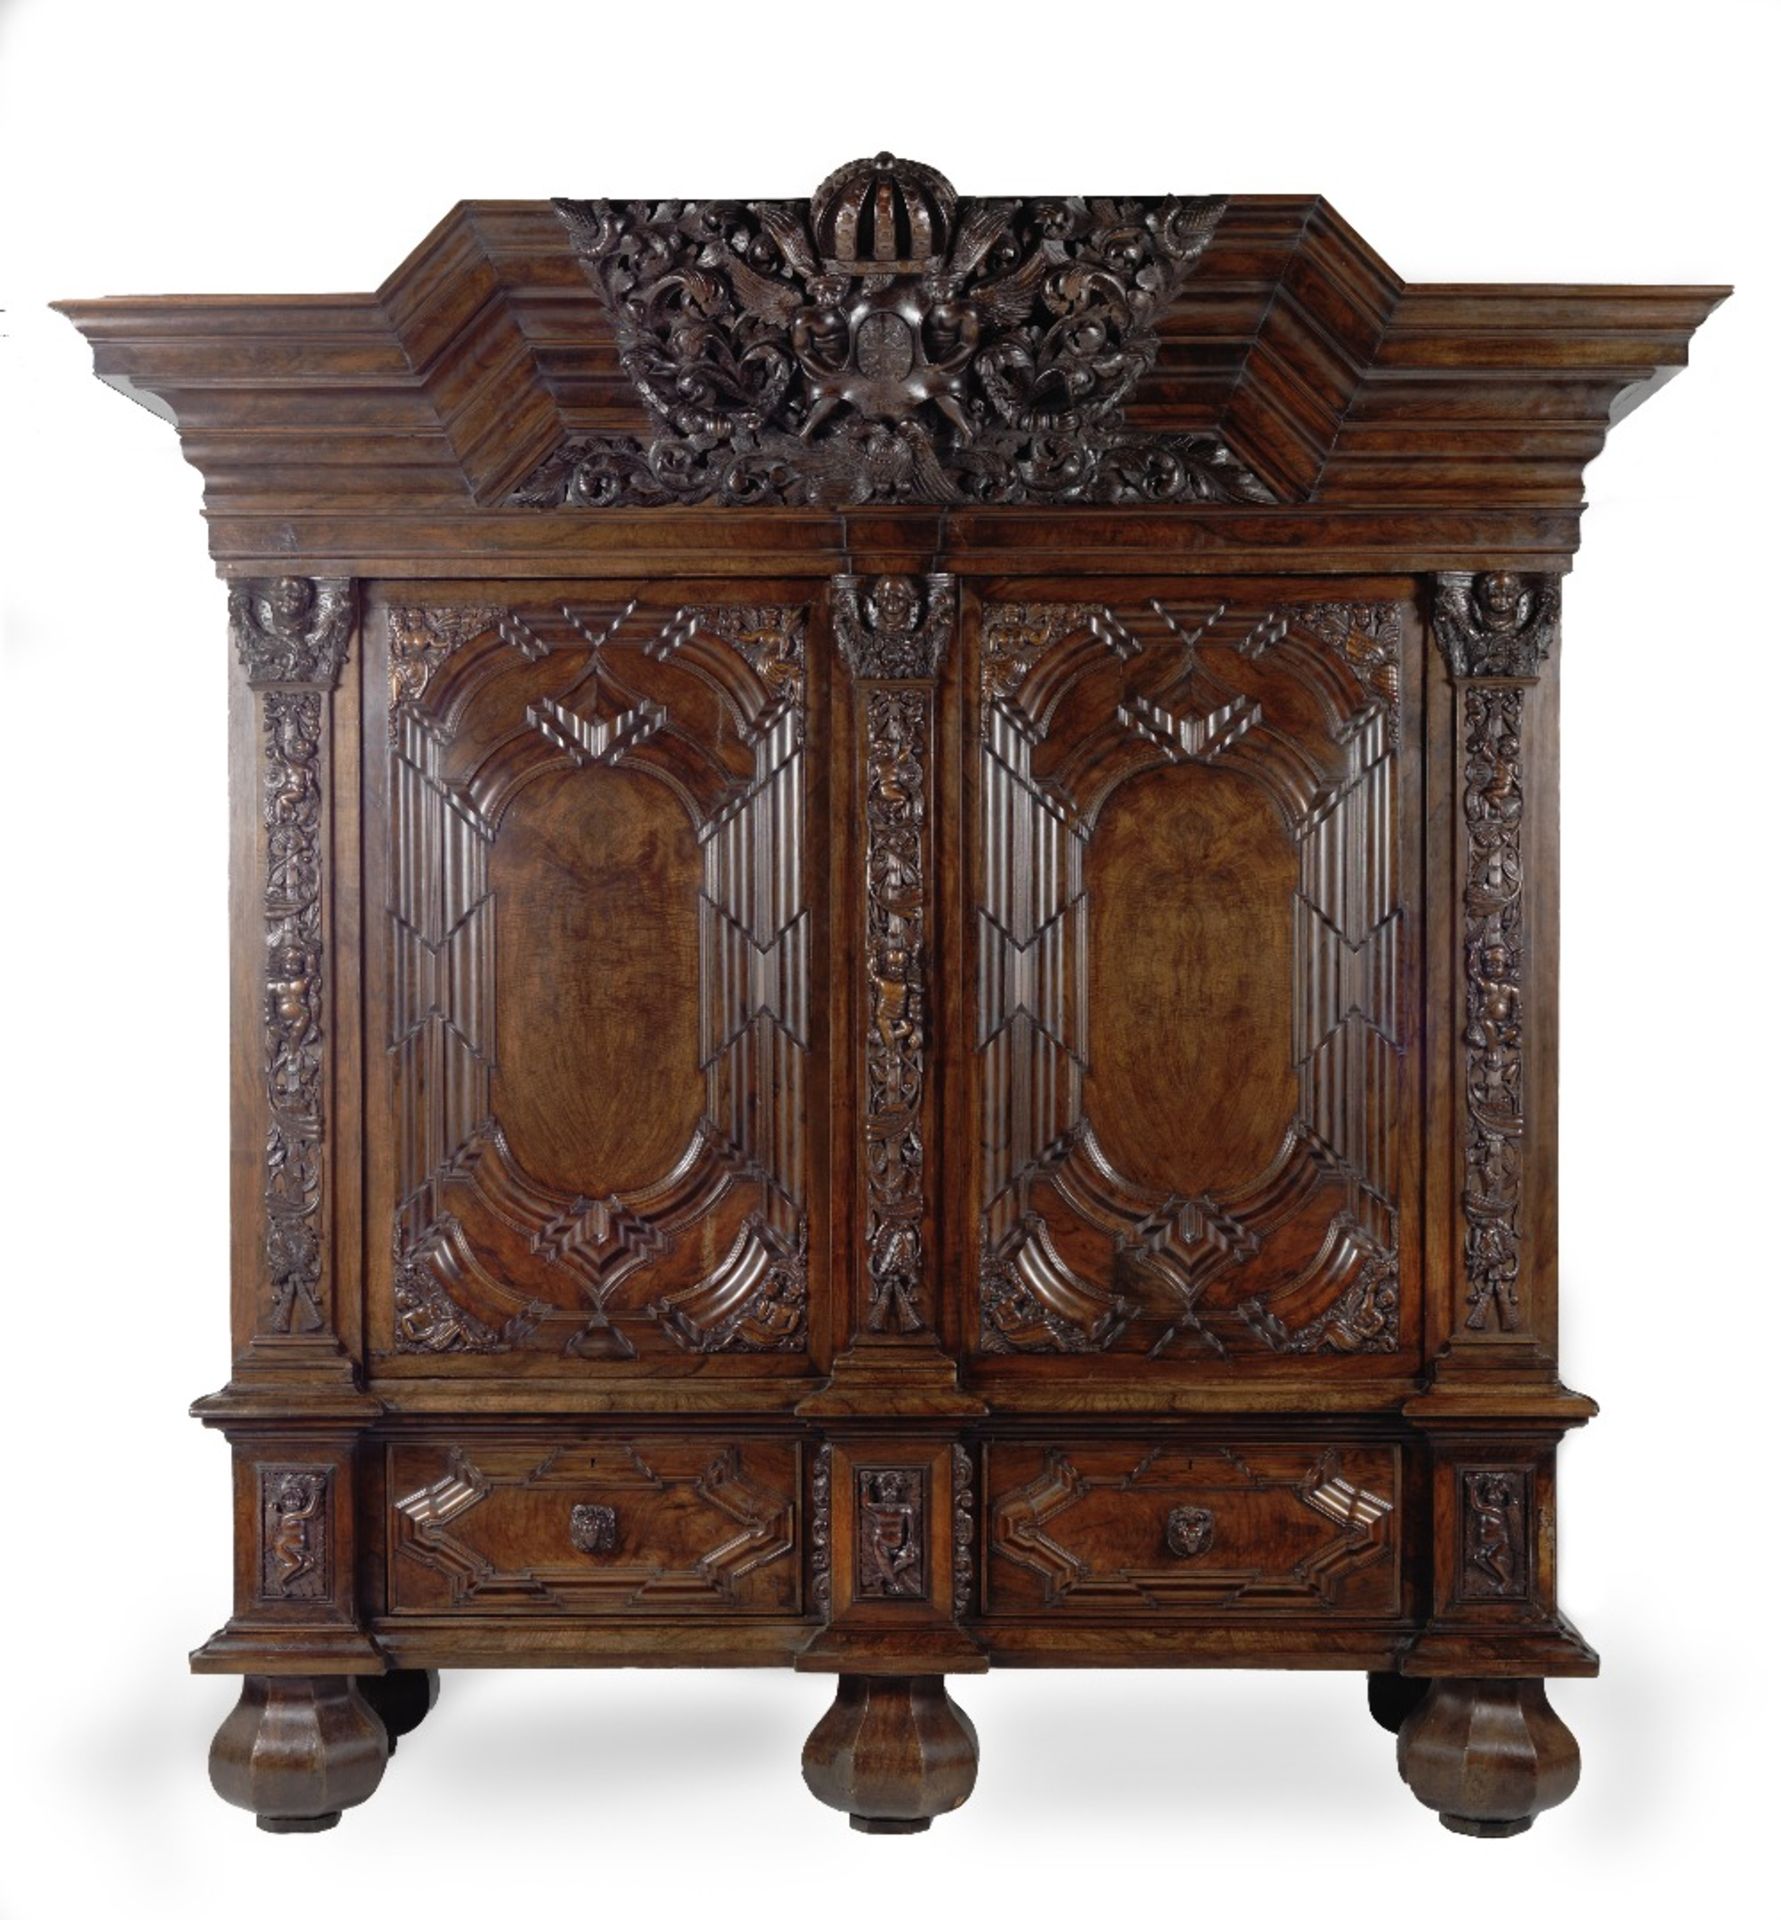 A large German walnut schrank or wardrobe Early 18th century but apparently with some later elem...